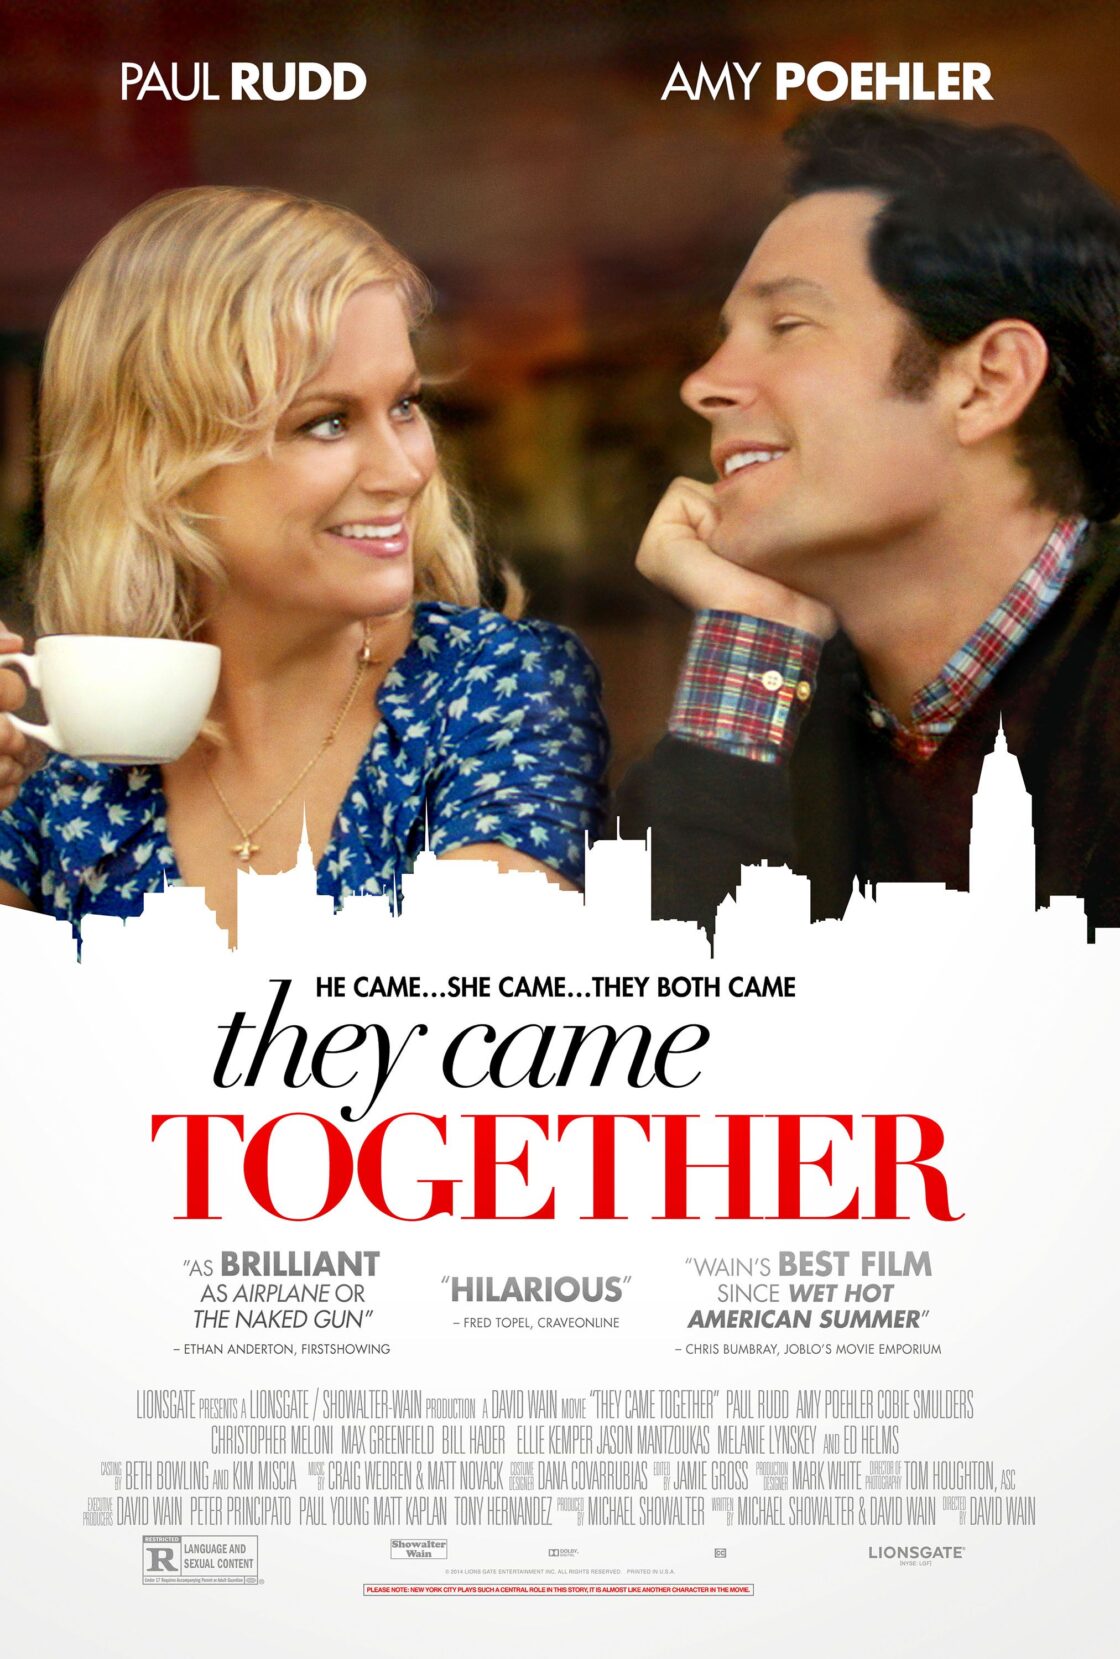 Amy Poehler, Paul Rudd, They Came Together, PopViewers